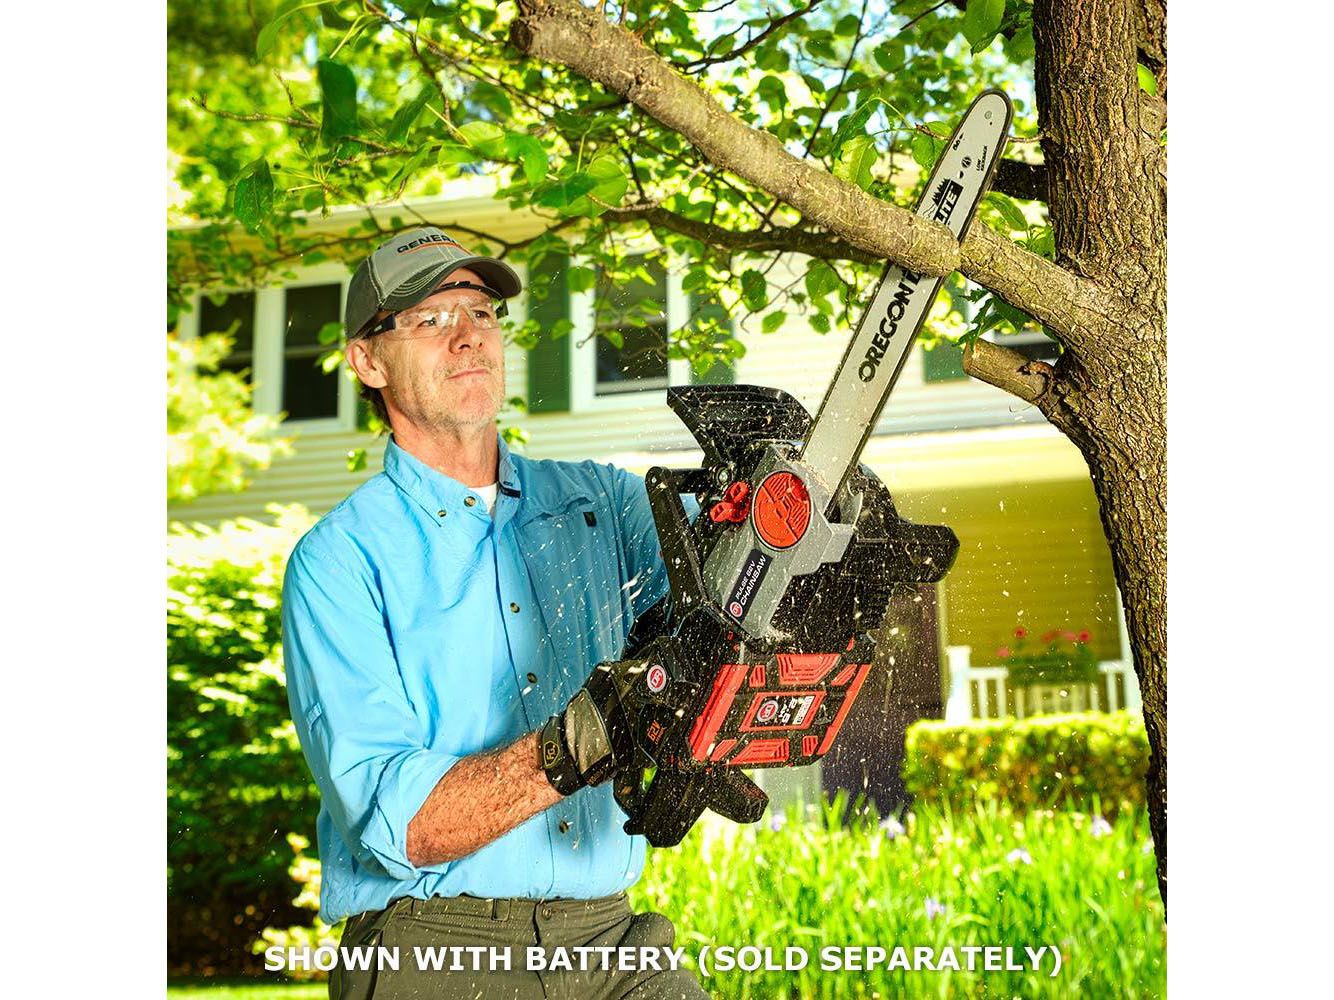 DR Power Equipment DR Battery-Powered Chainsaw in Saint Helens, Oregon